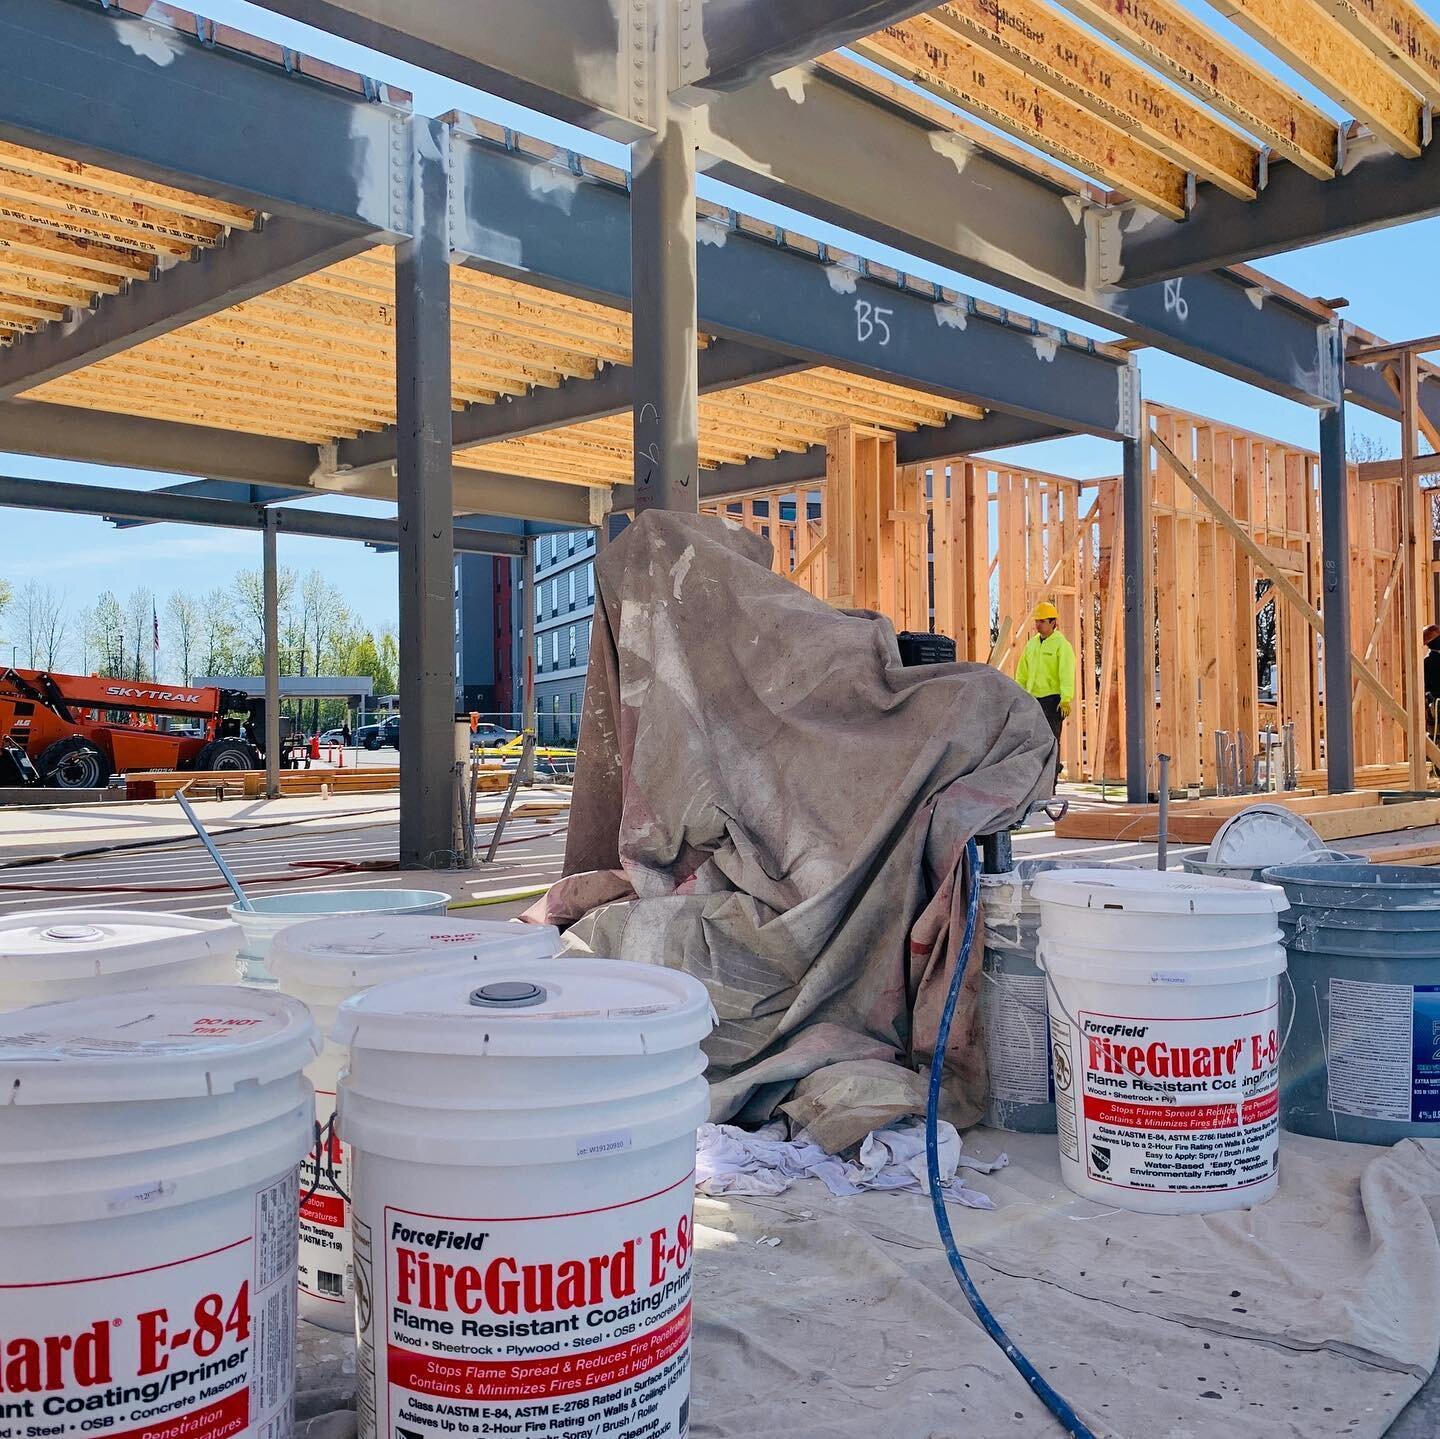 Intumescent #painting and #fireproofing application on steel columns and beams. #industrialpainting #pdx